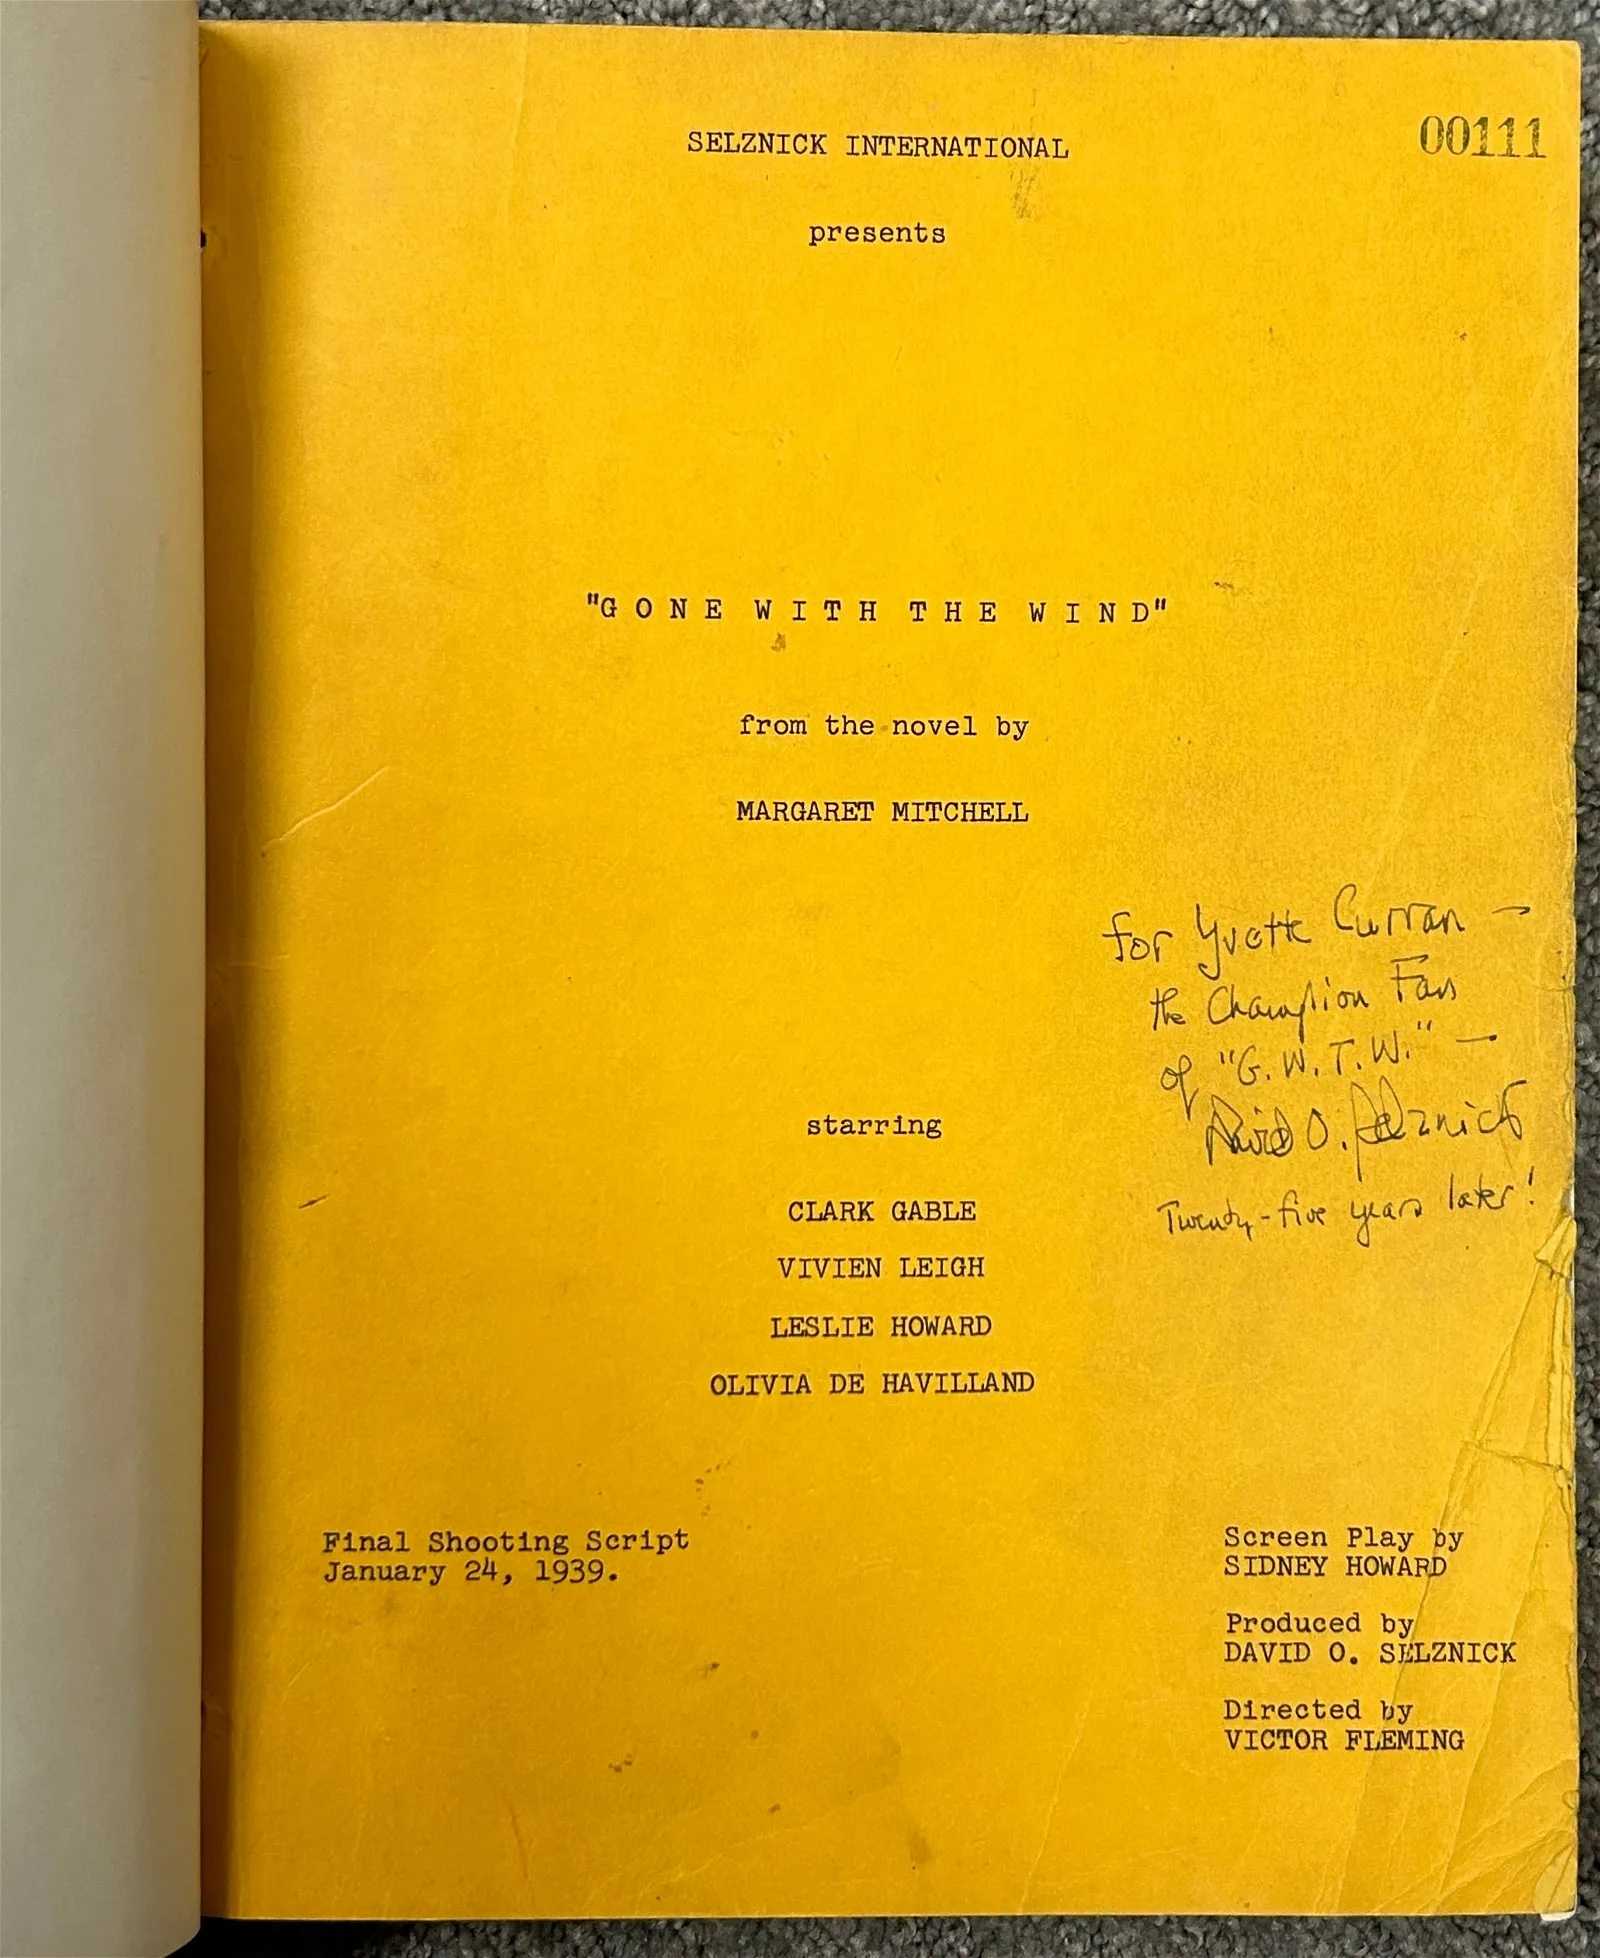 'Gone with the Wind' original shooting script bound by producer David O. Selznick, estimated at $15,000-$25,000 at Piece of the Past.